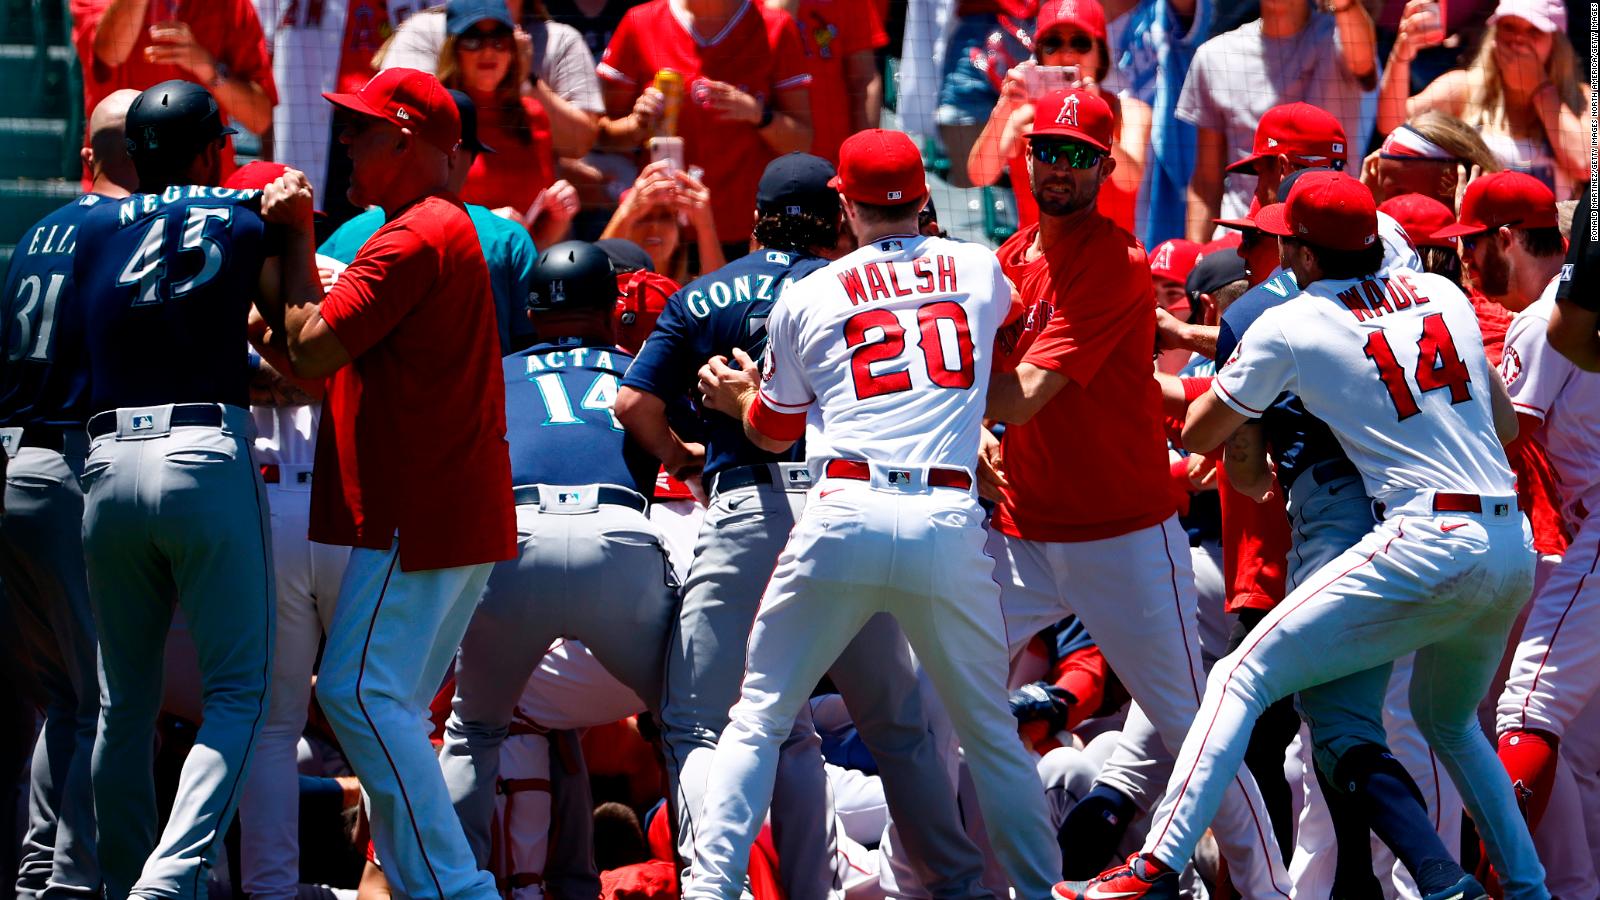 MLB 12 suspended after mass brawl between Mariners and Angels CNN